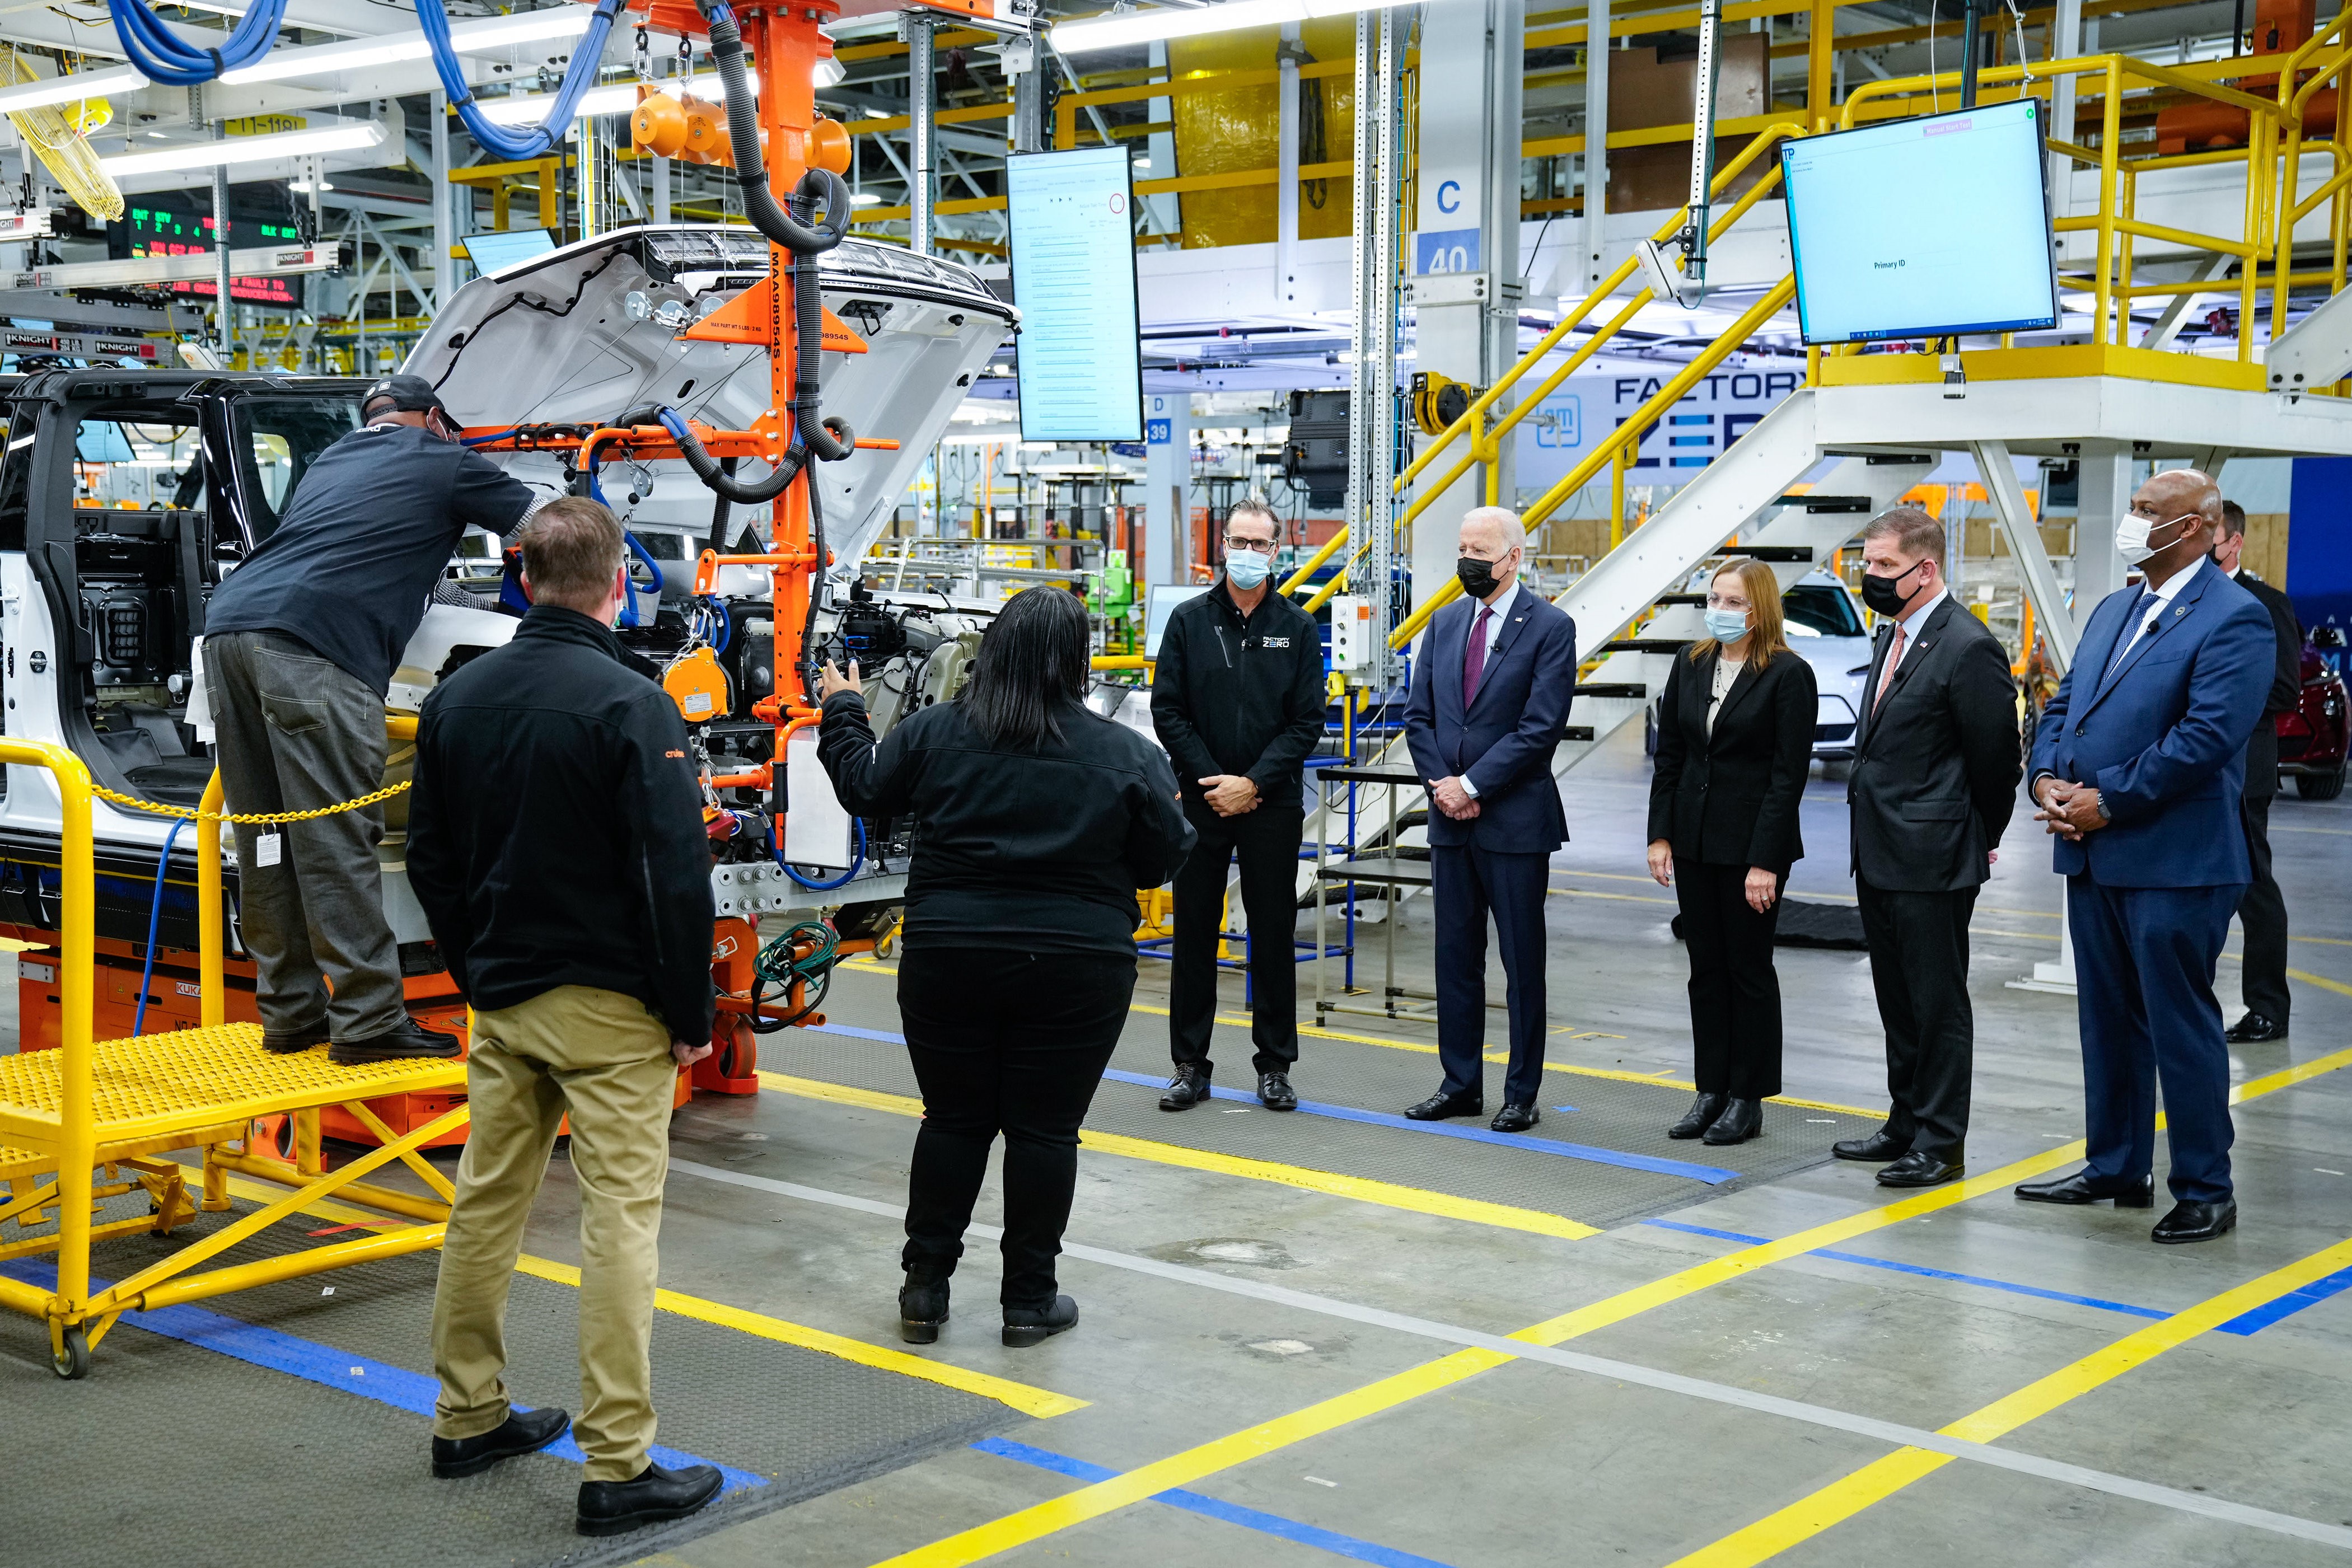 From left to right: Factory ZERO Plant Director Jim Quick, President Joe Biden, GM CEO Mary Barra, Secretary Marty Walsh and United Auto Workers President Ray Curry.